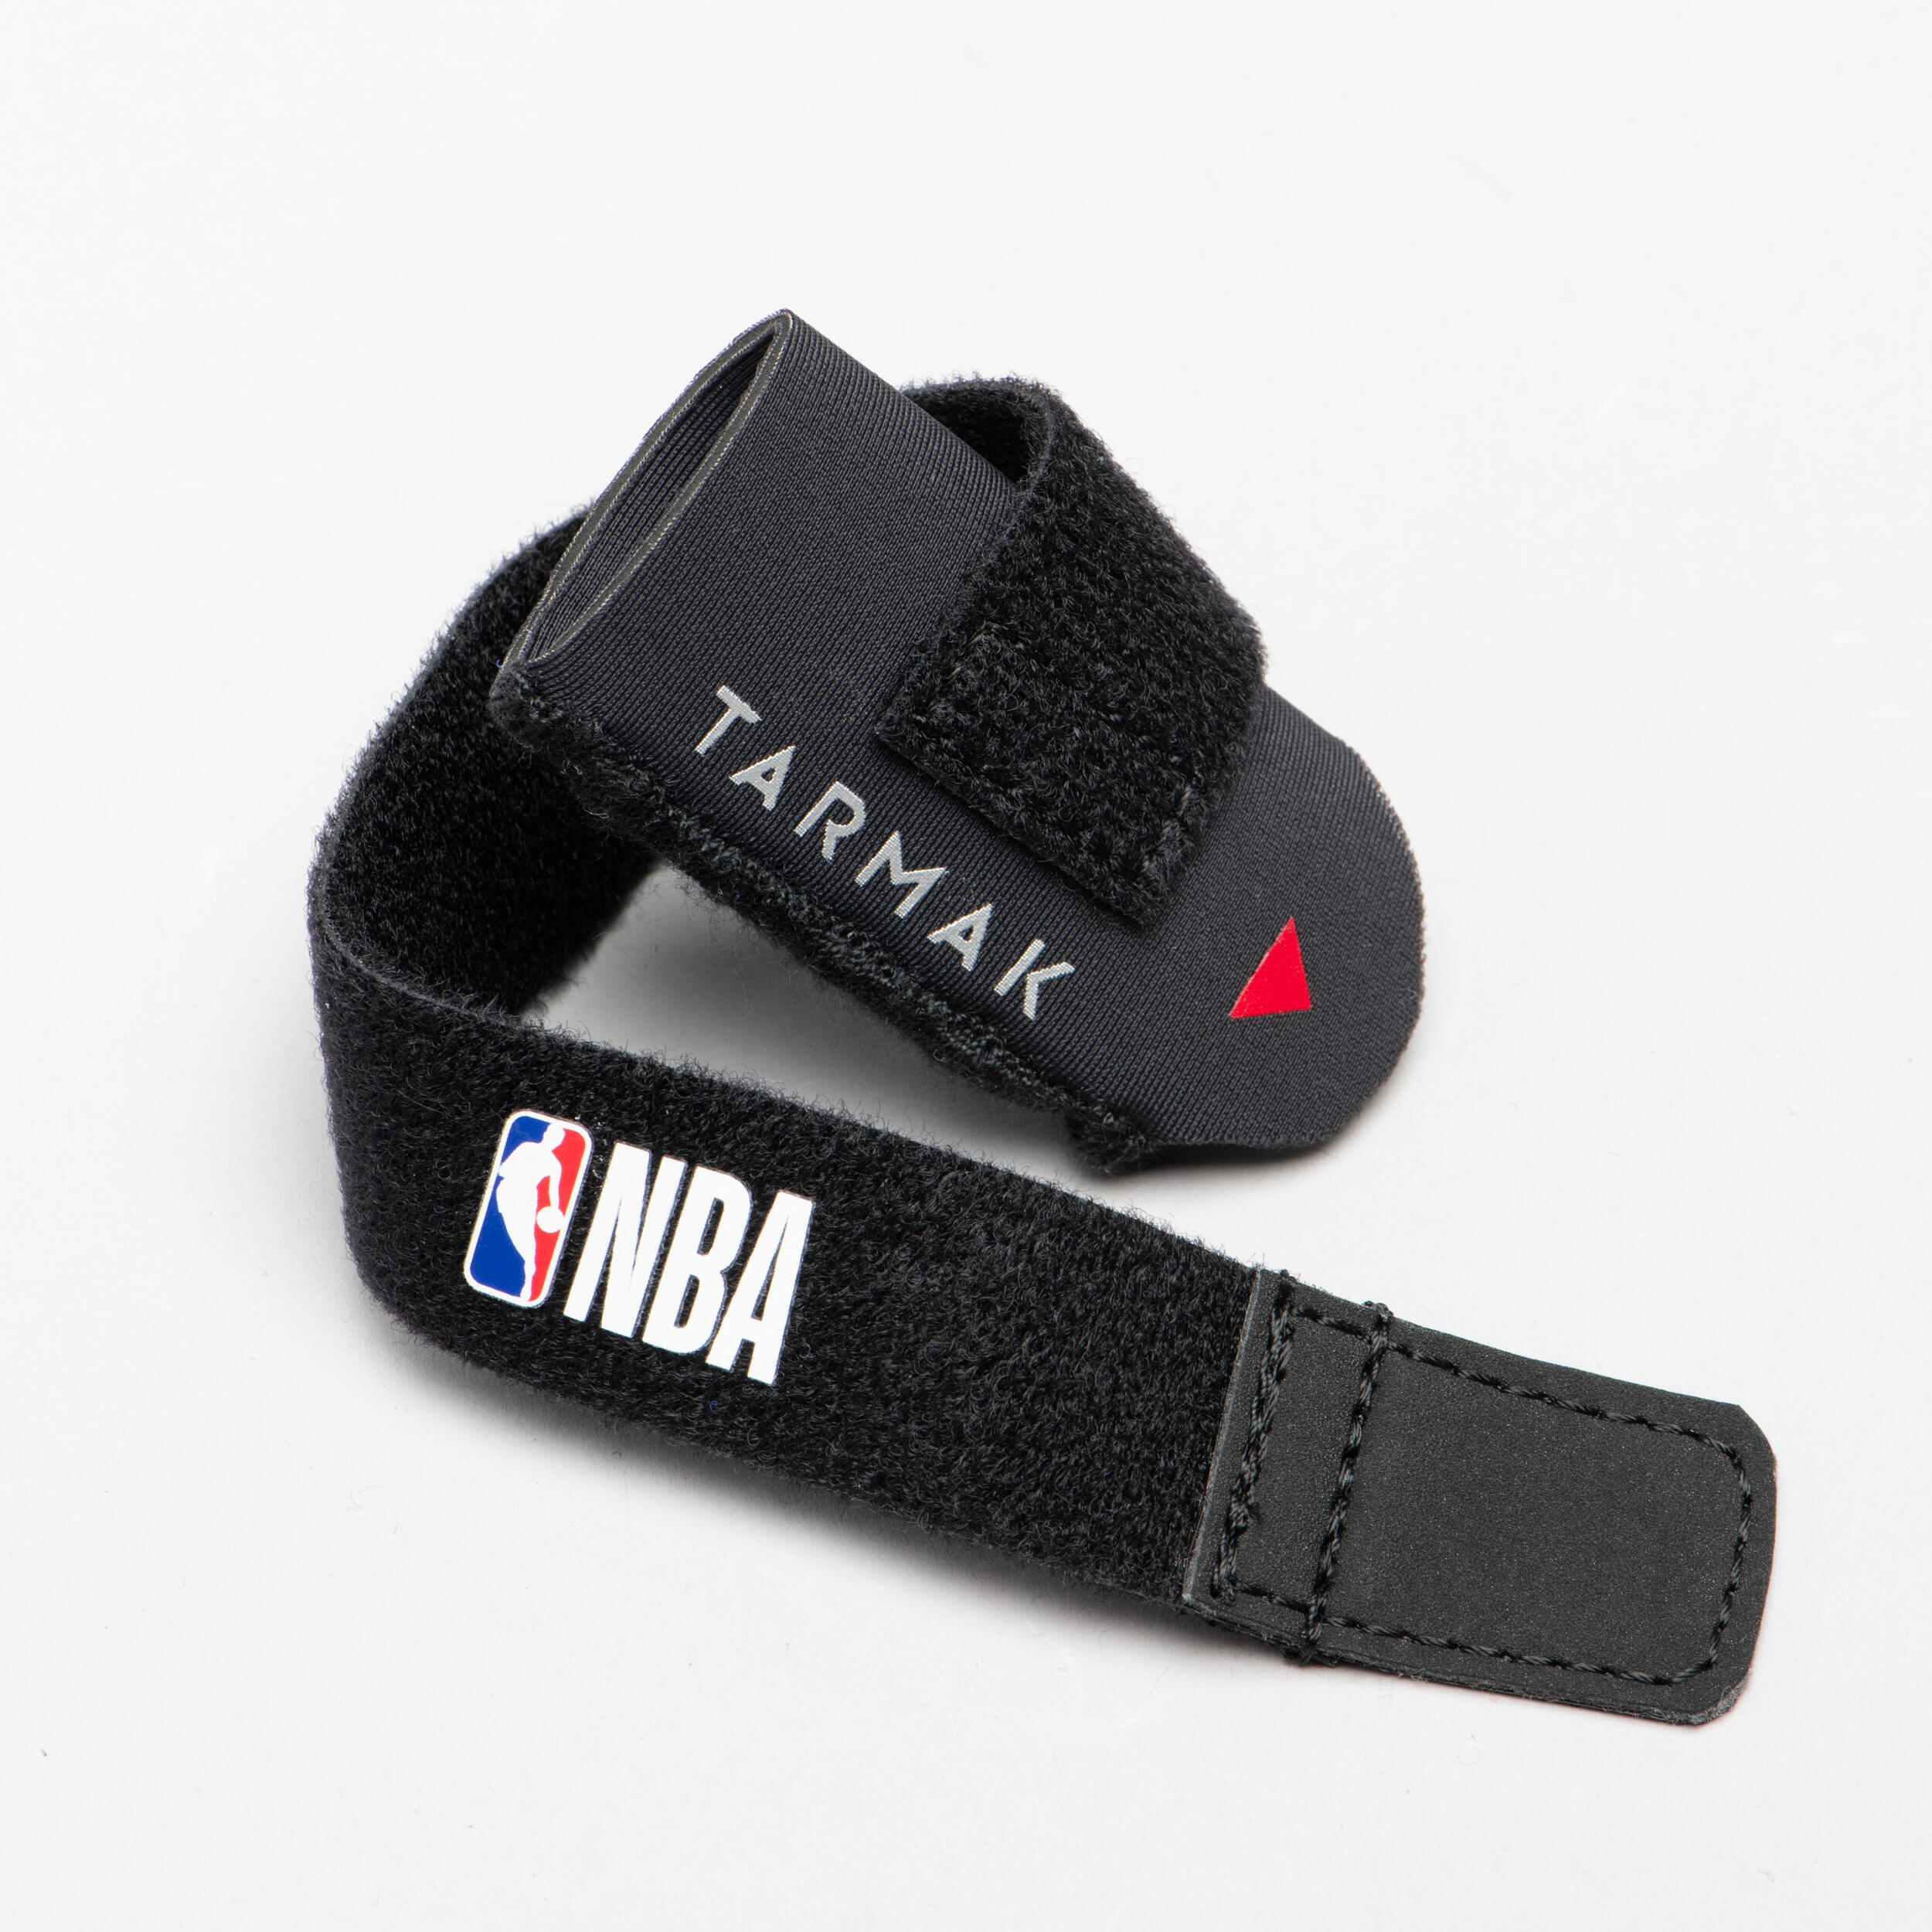 Adult Finger Support and Protect NBA Strong 500 - Black 2/7